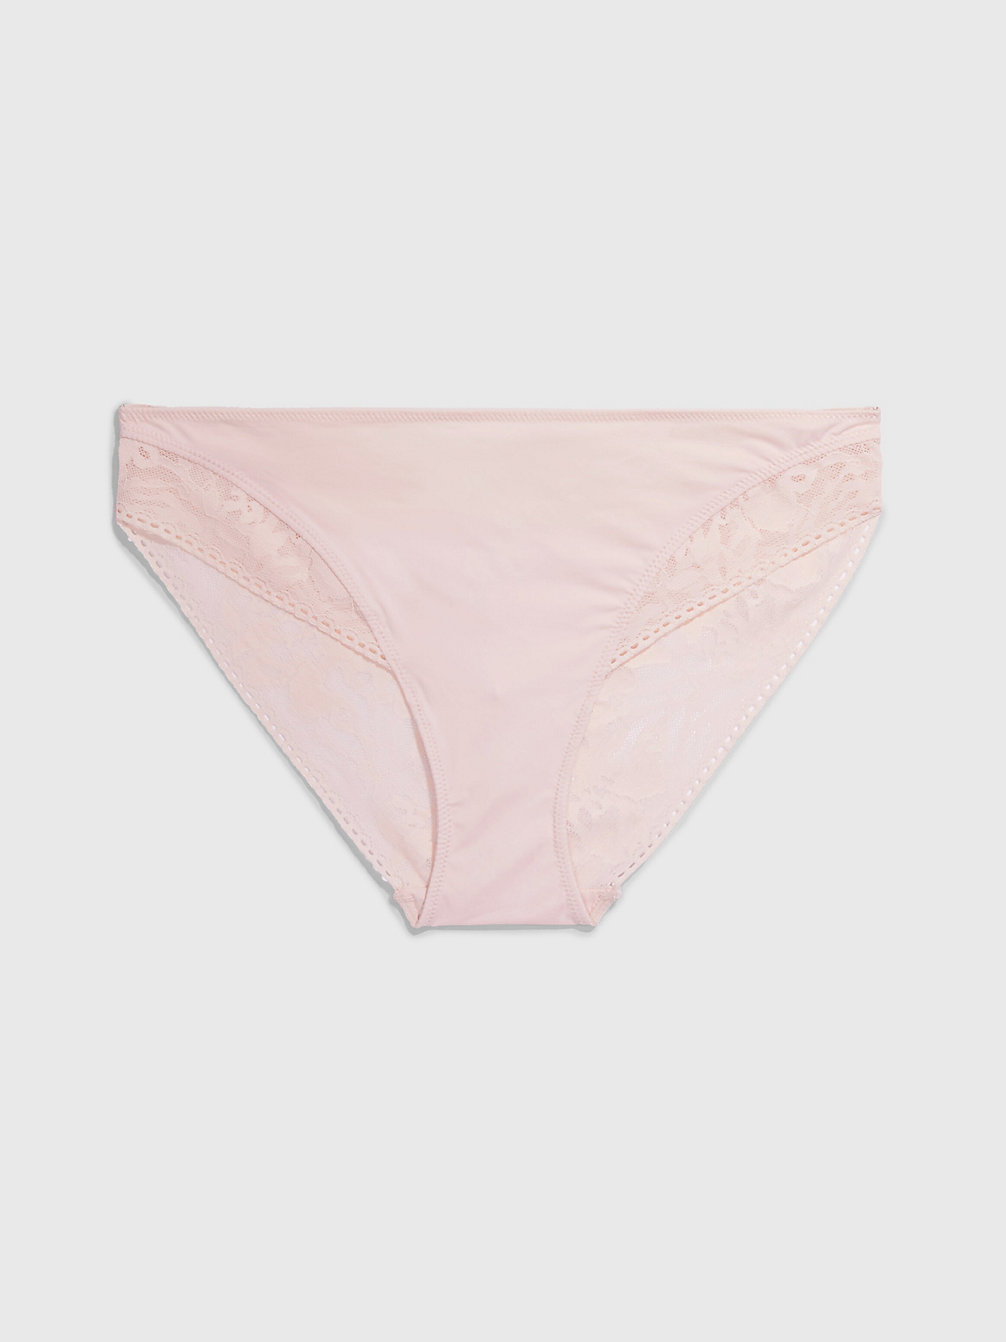 Braguita Clásica - Ultra Soft Lace > NYMPTHÂ€™S THIGH > undefined mujer > Calvin Klein